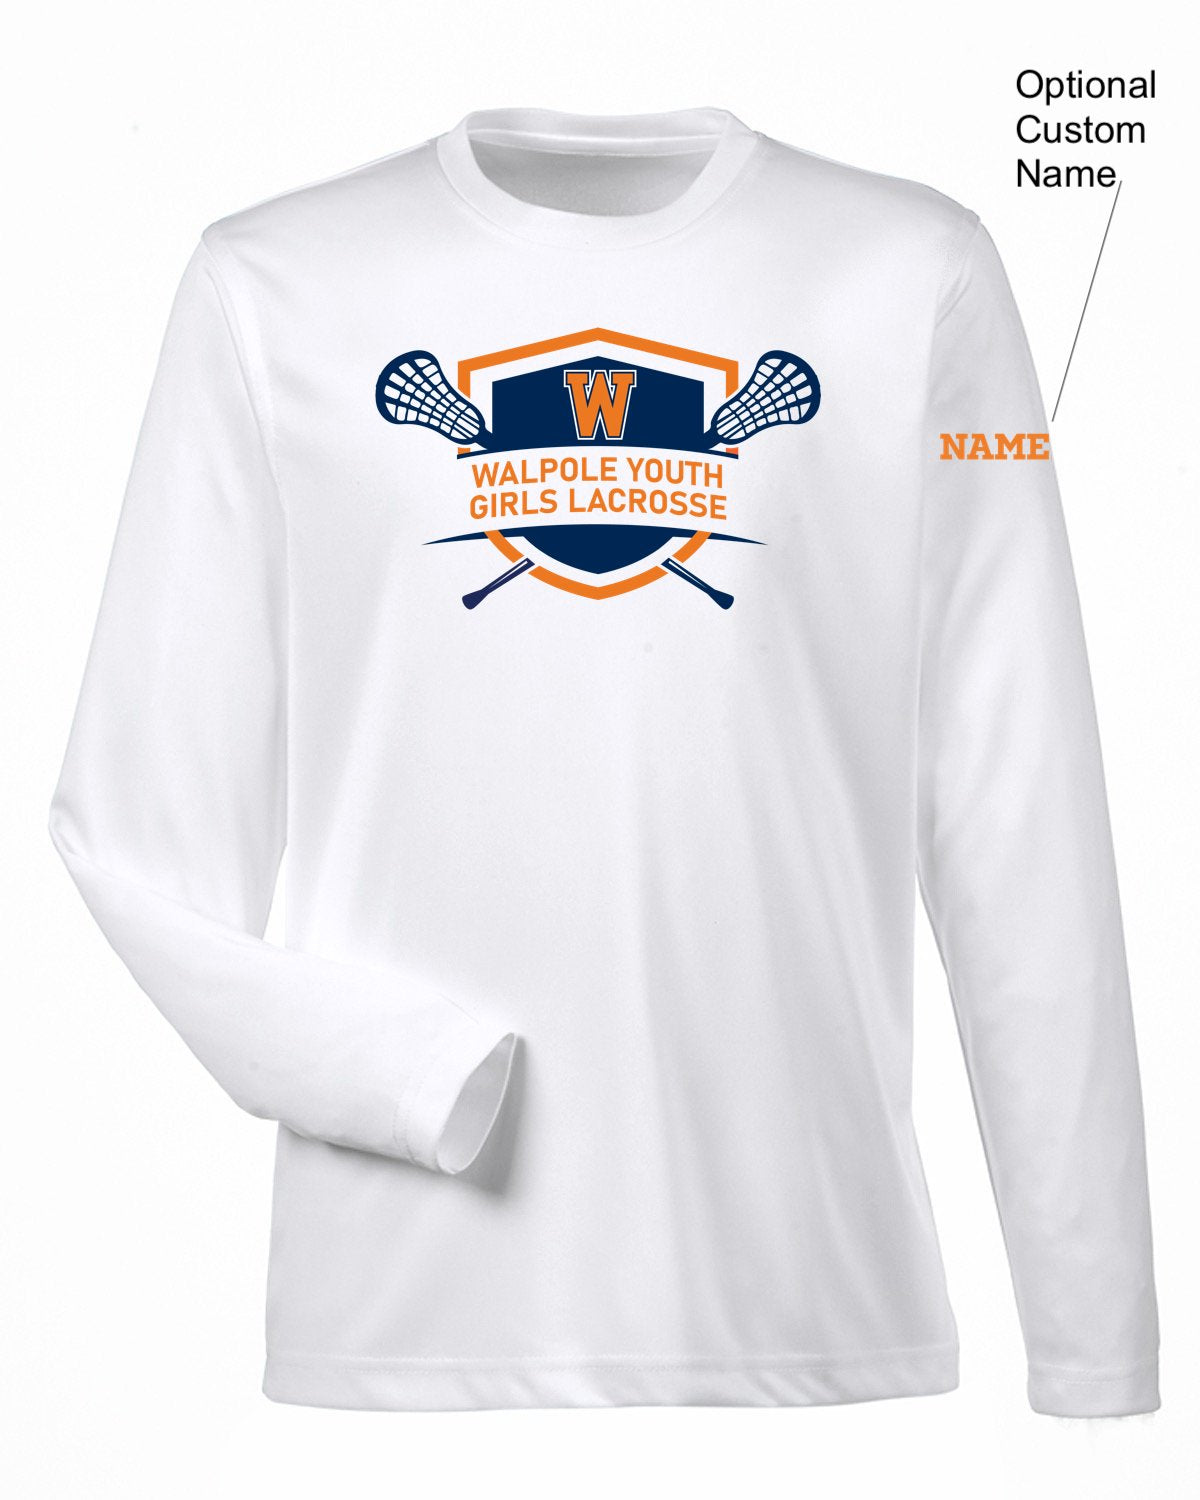 Walpole Youth Girls Lacrosse -Cool & Dry Performance Long-Sleeve Top (Youth - 8622Y)